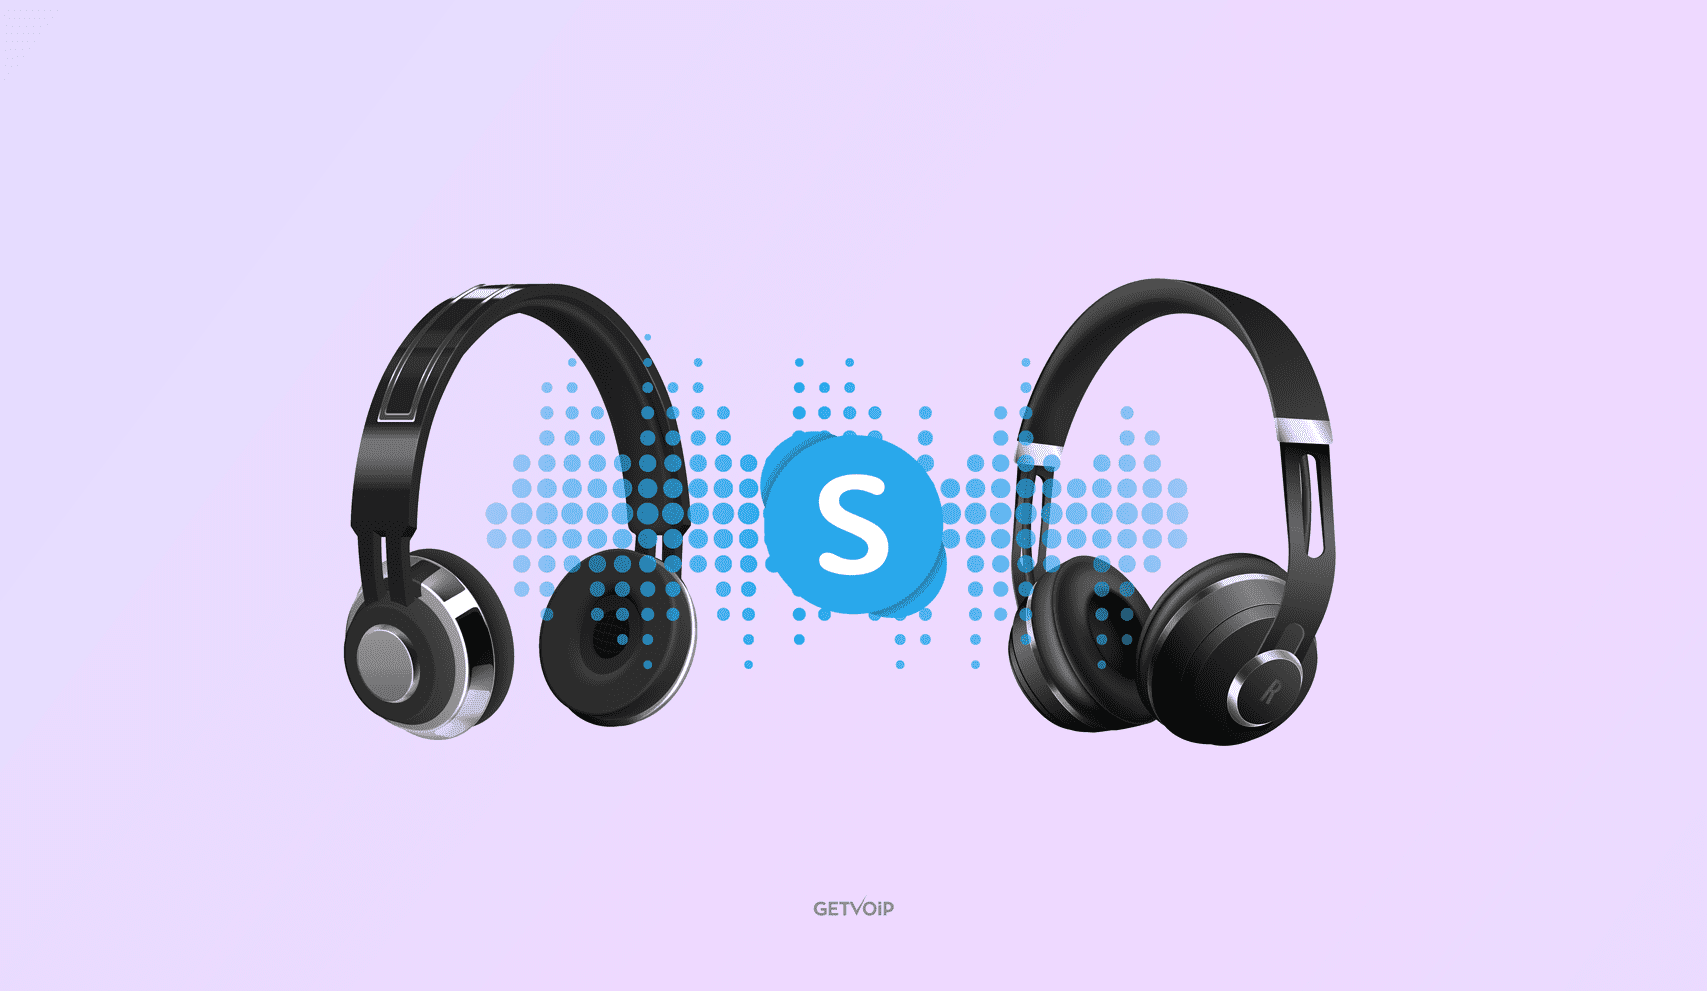 The Top 10 Skype Compatible Business Headsets in 2020